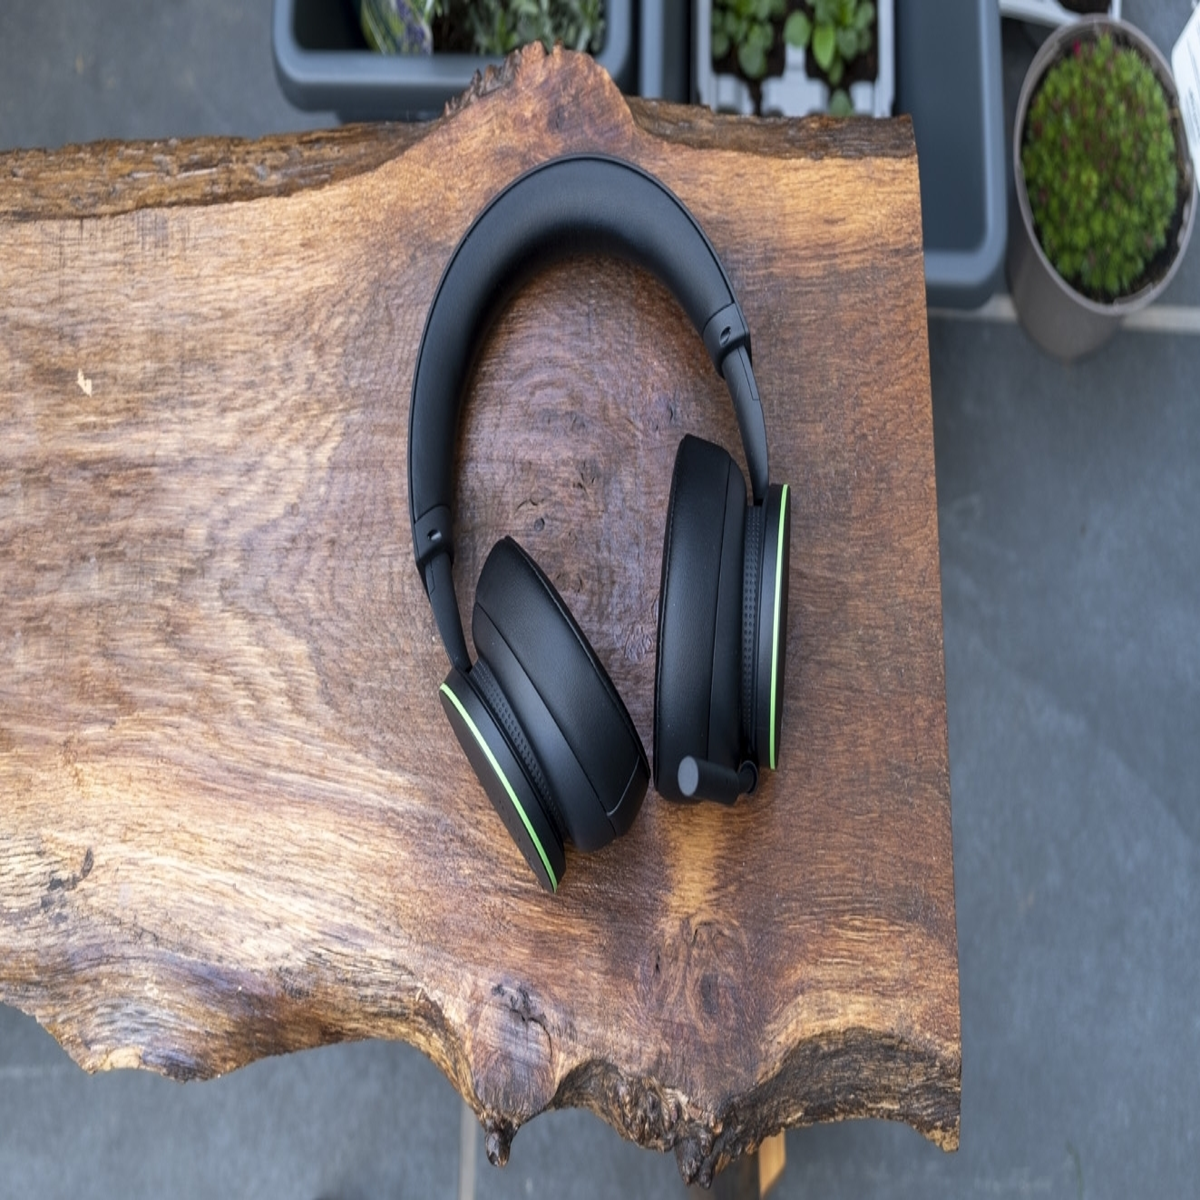 Xbox Wireless Headset review: our new top recommendation for Xbox